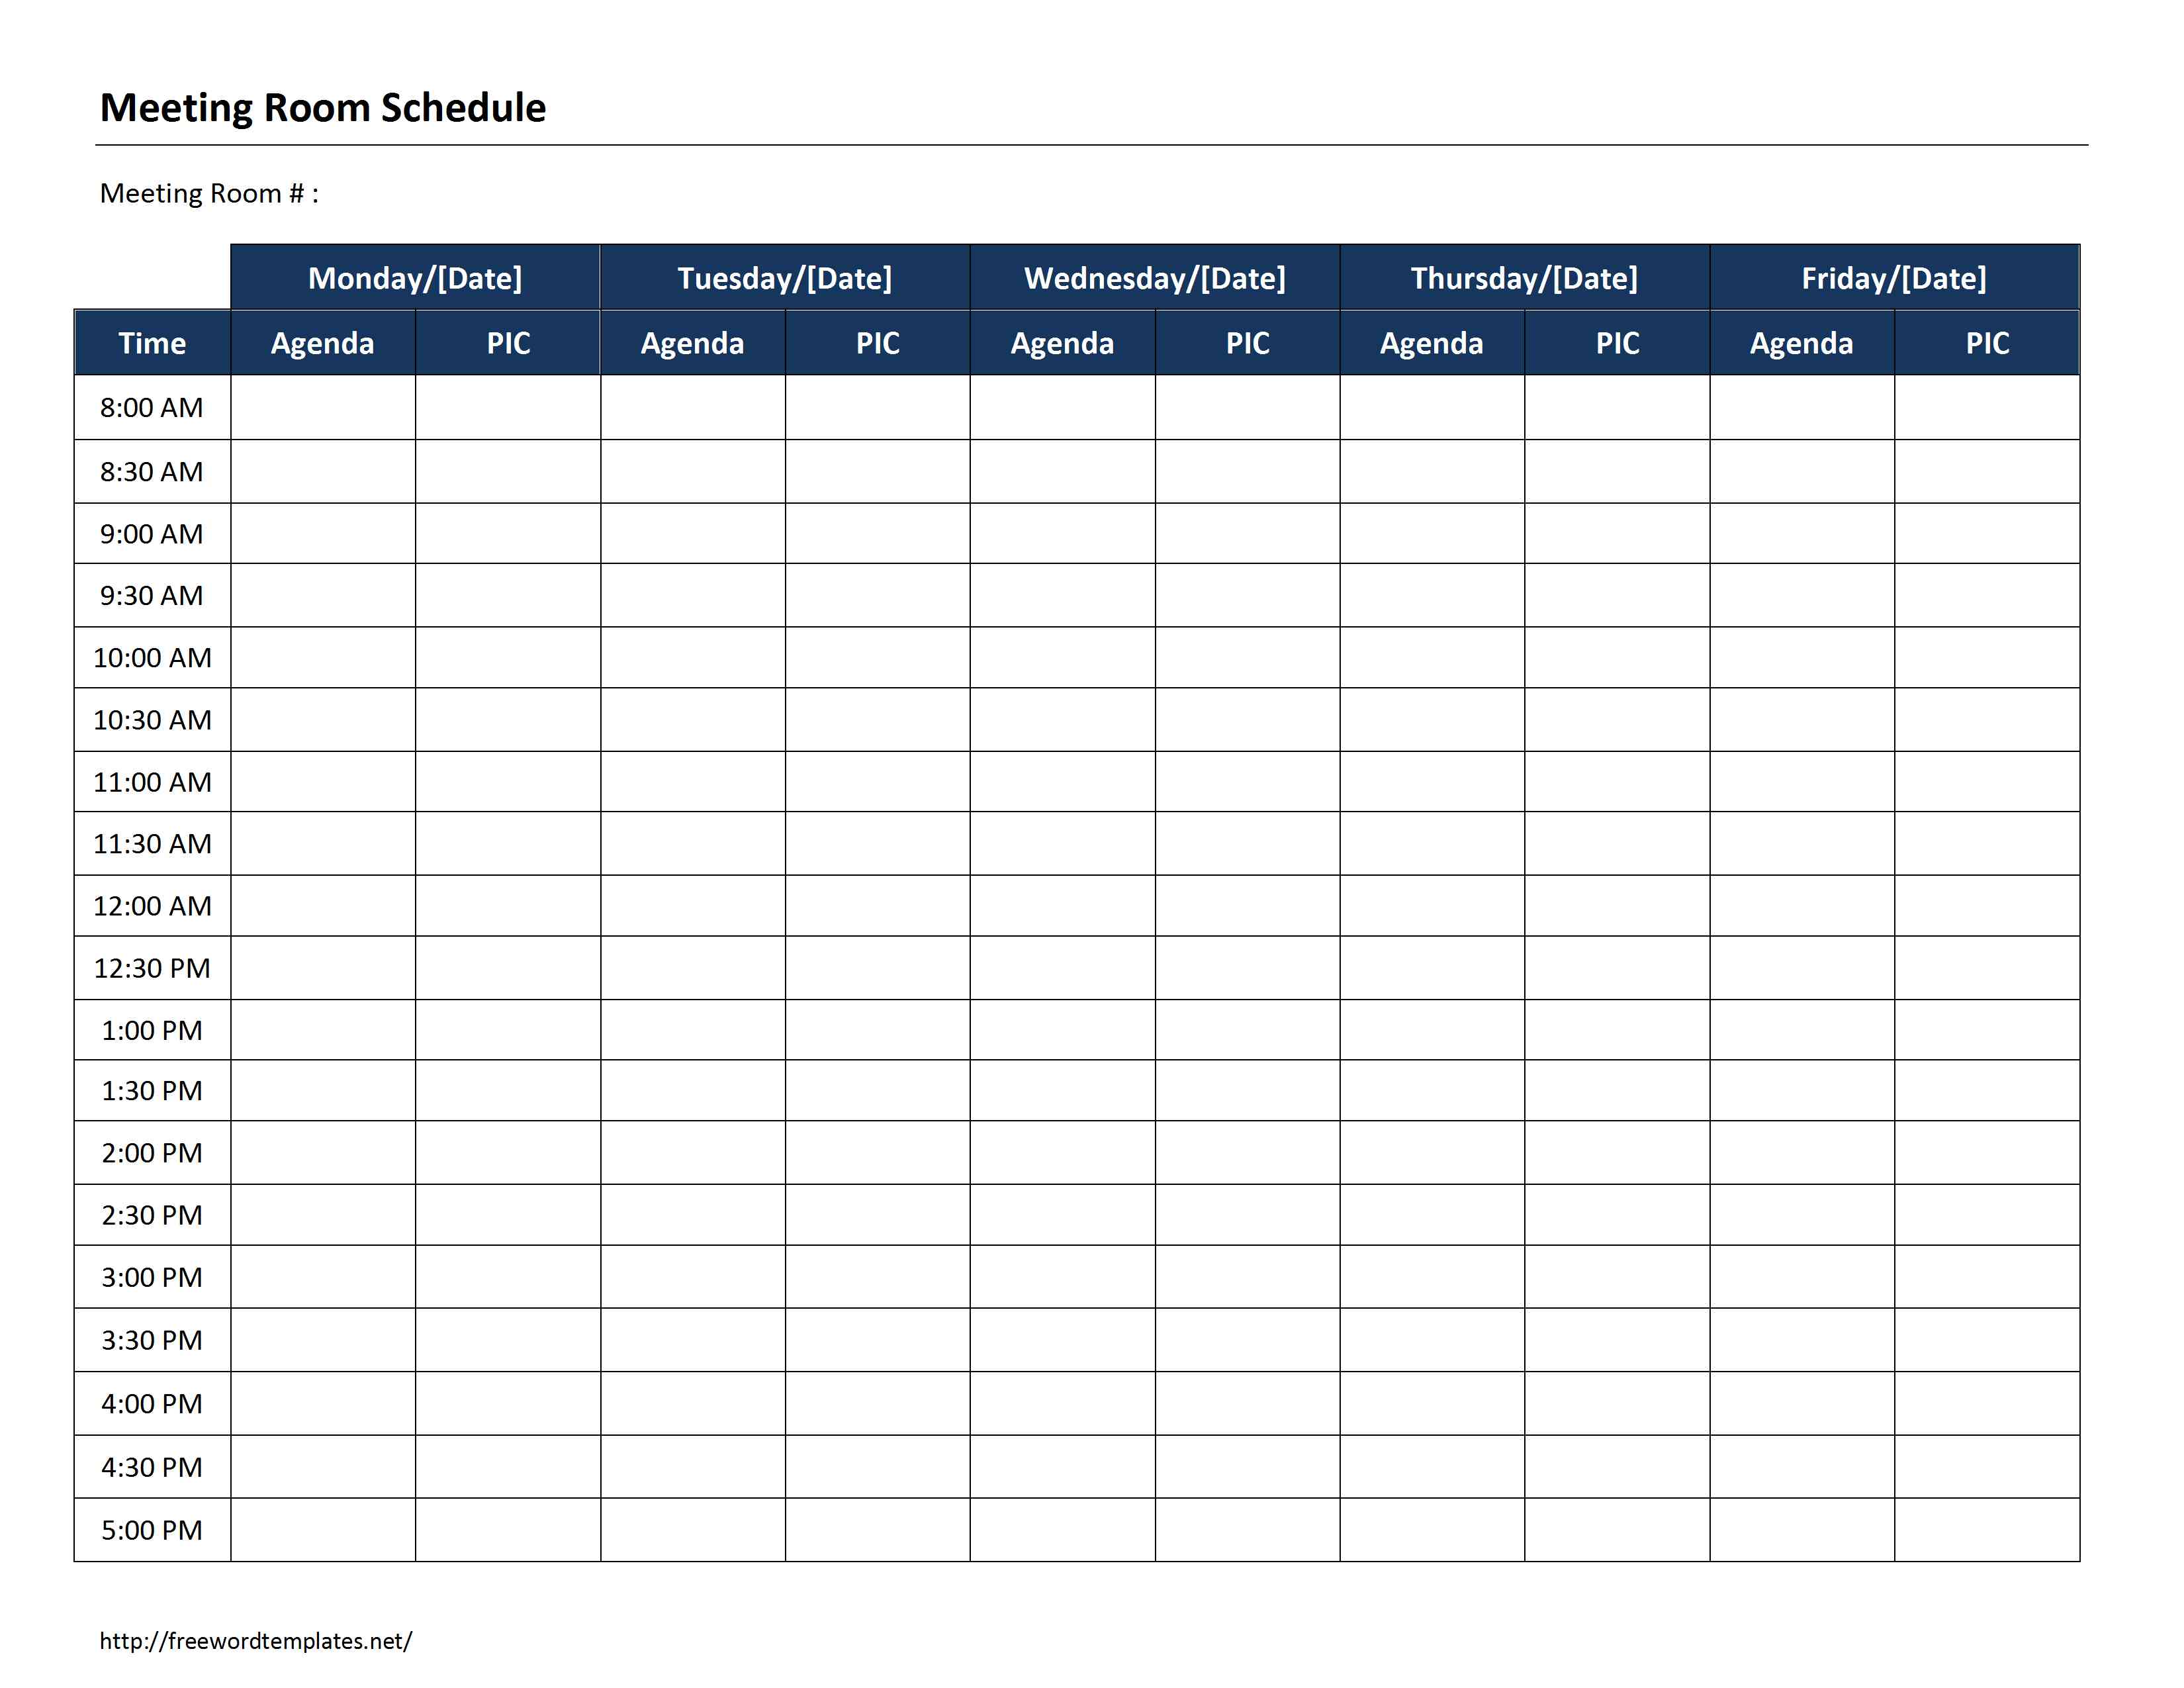 Meeting Room Booking Form Template for Word